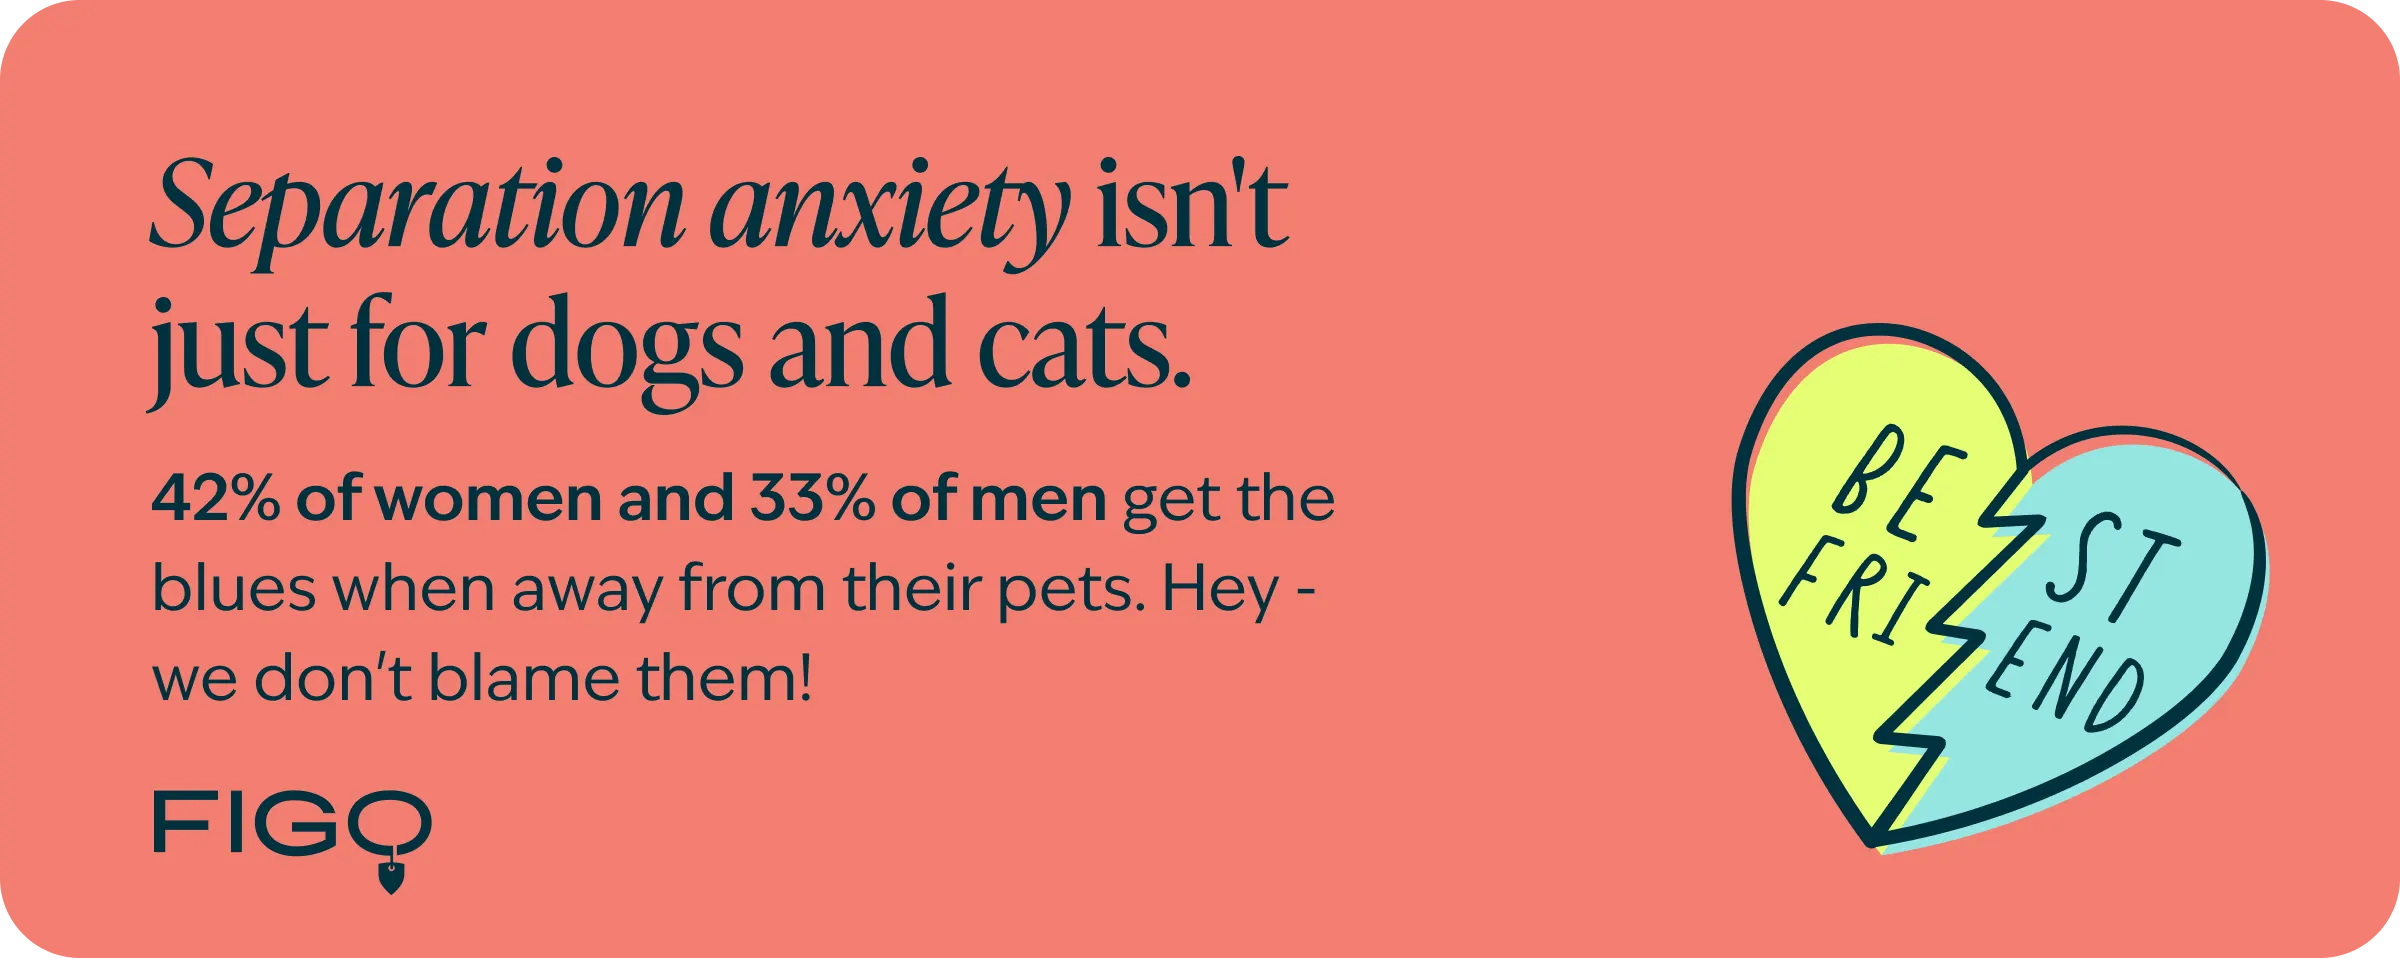 Valentines pet data blog about separation anxiety